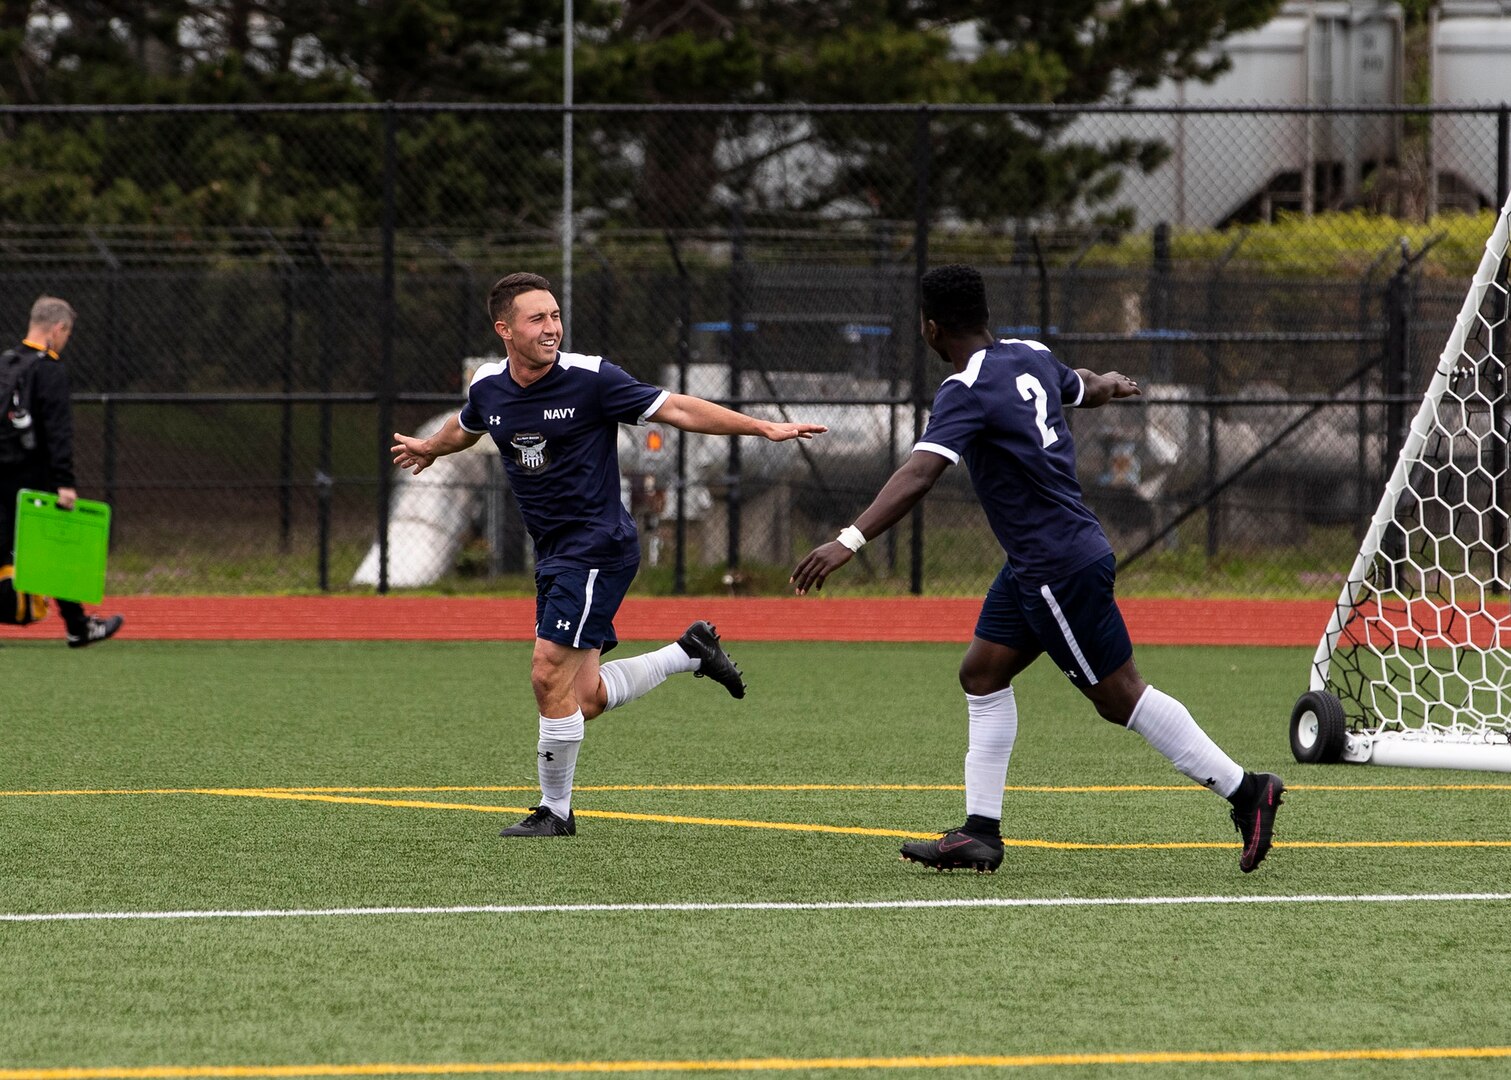 NAVAL STATION EVERETT, Wash.  (April 20, 2019) The final matches and medal presentation of the 2019 Armed Forces Men's Soccer Championship held at Naval Station Everett, Wash. from 14-20 April, featuring Service members from the Army, Marine Corps, Navy (including Coast Guard) and Air Force. (U.S. Navy photo by MC2 Ian Carver/Released)